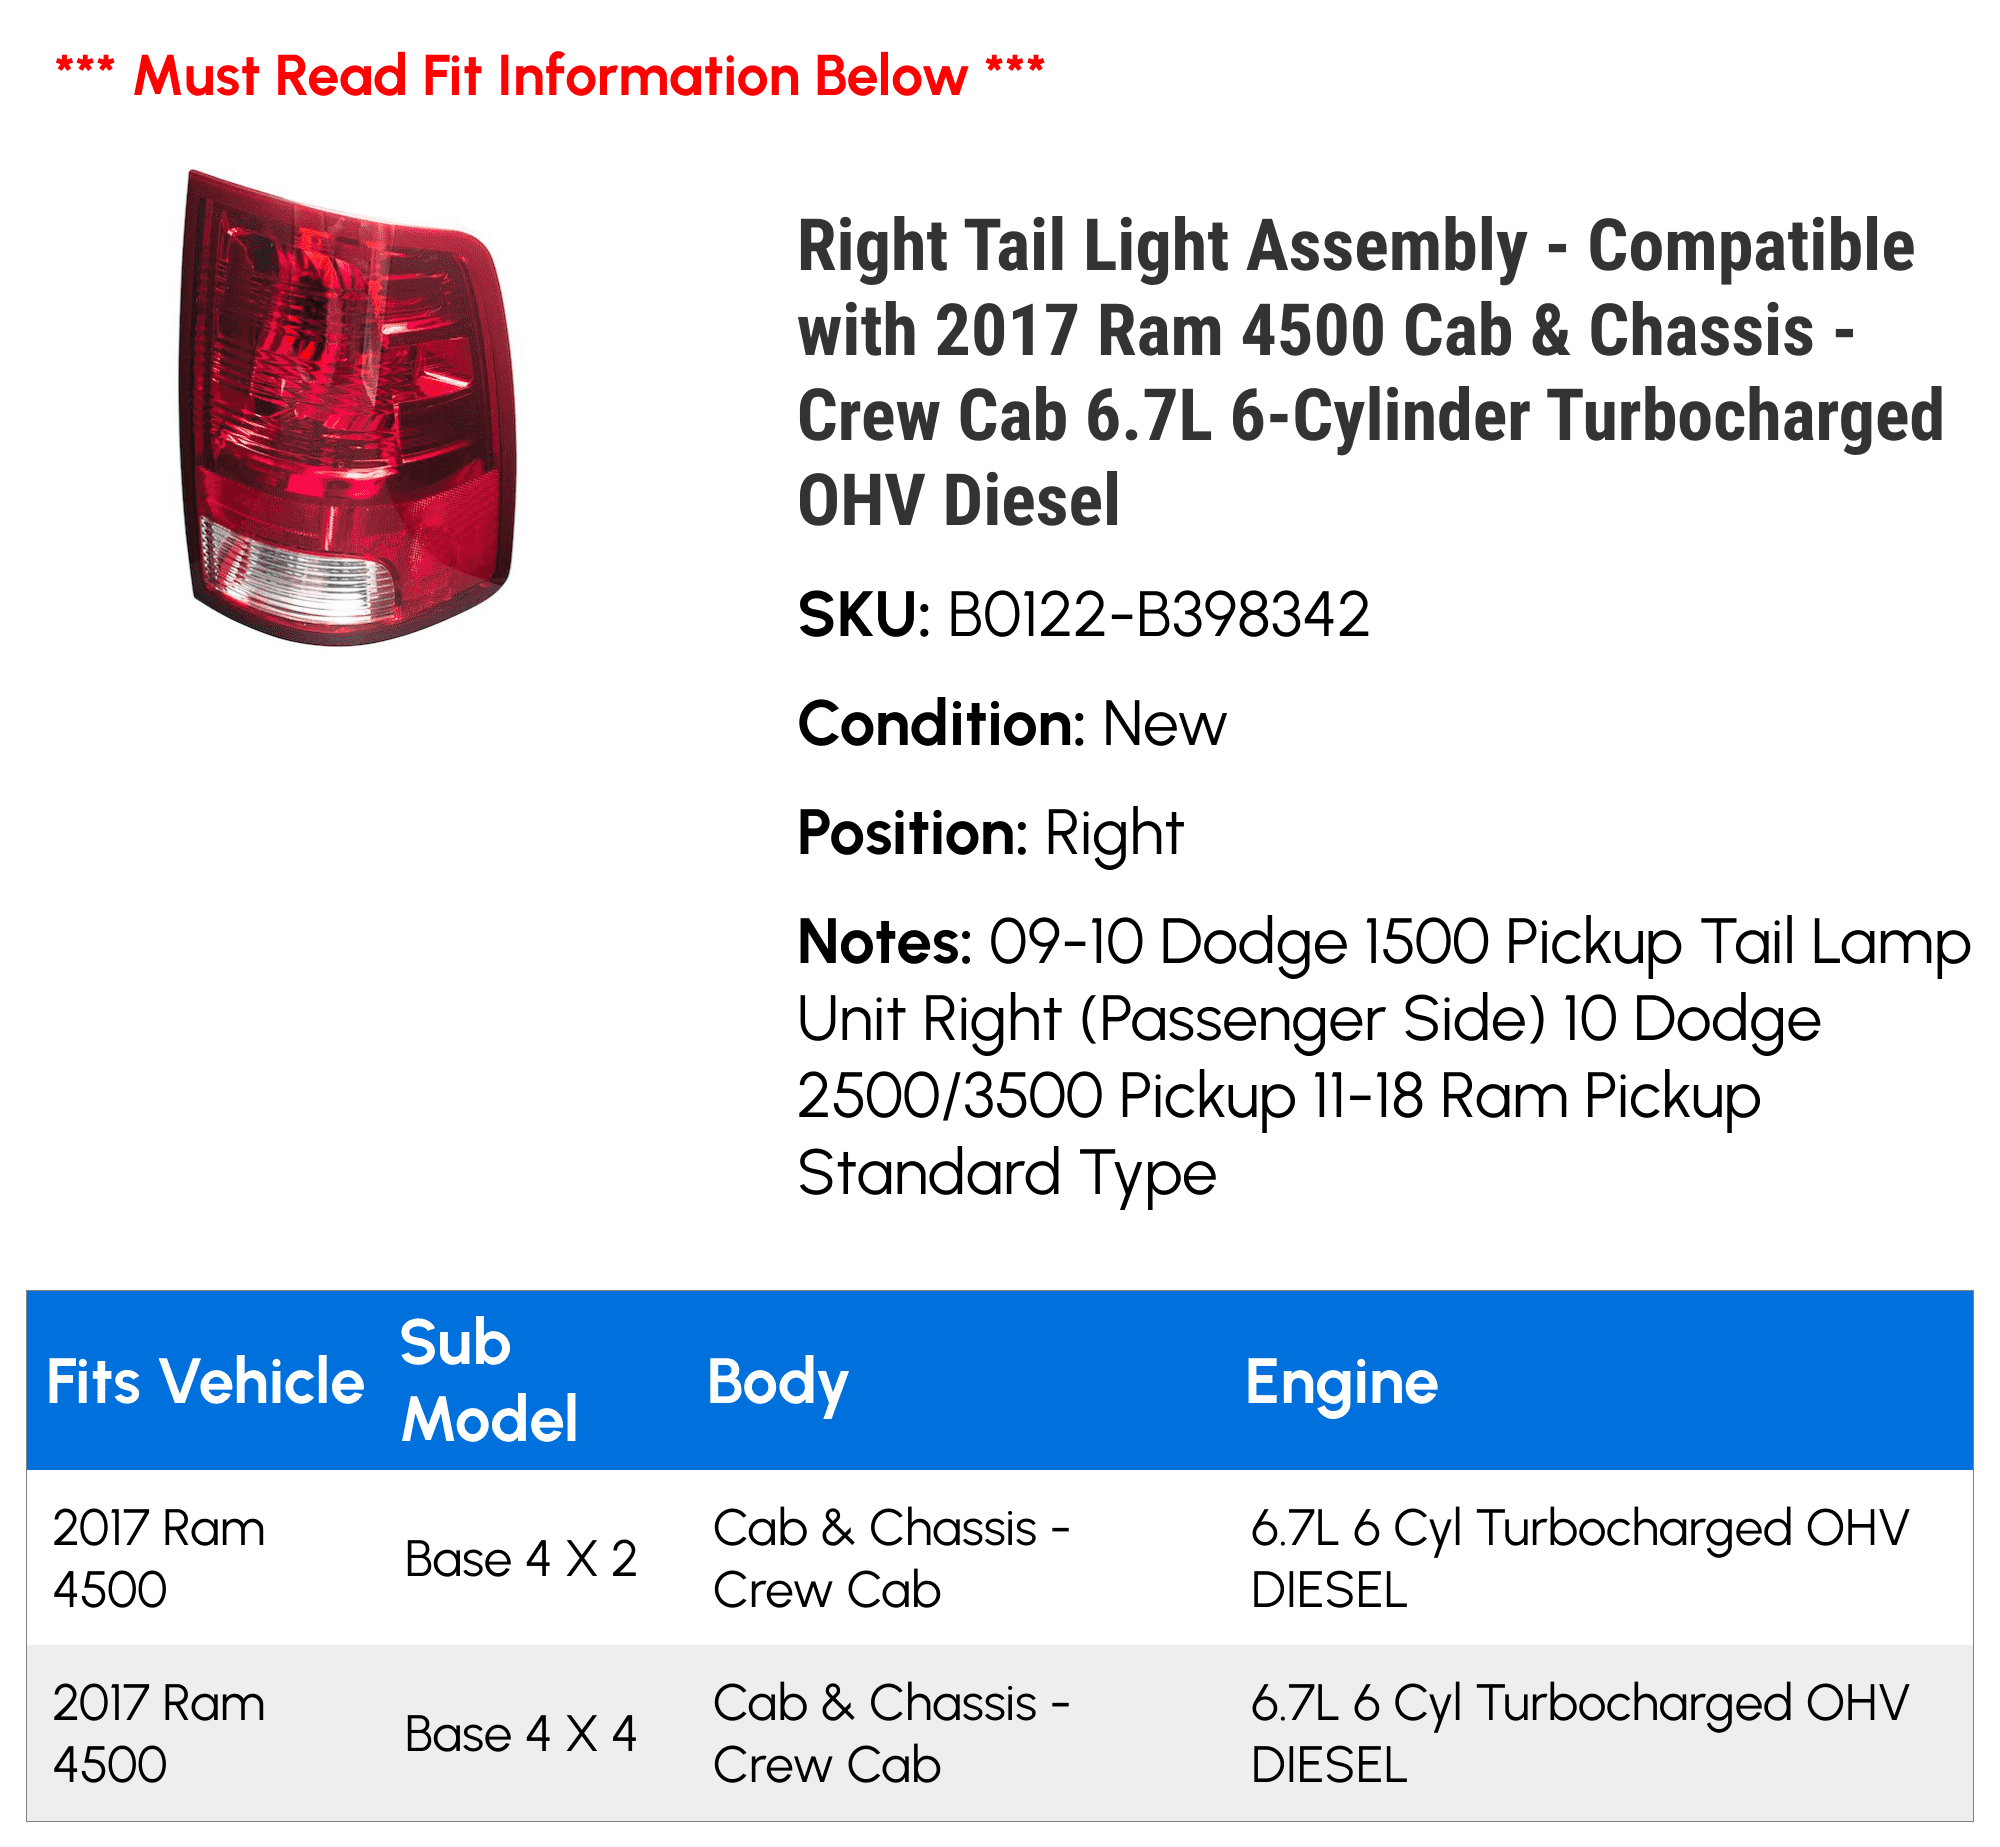 Right Tail Light Assembly - Compatible with 2017 Ram 4500 Cab & Chassis -  Crew Cab 6.7L 6-Cylinder Turbocharged OHV Diesel